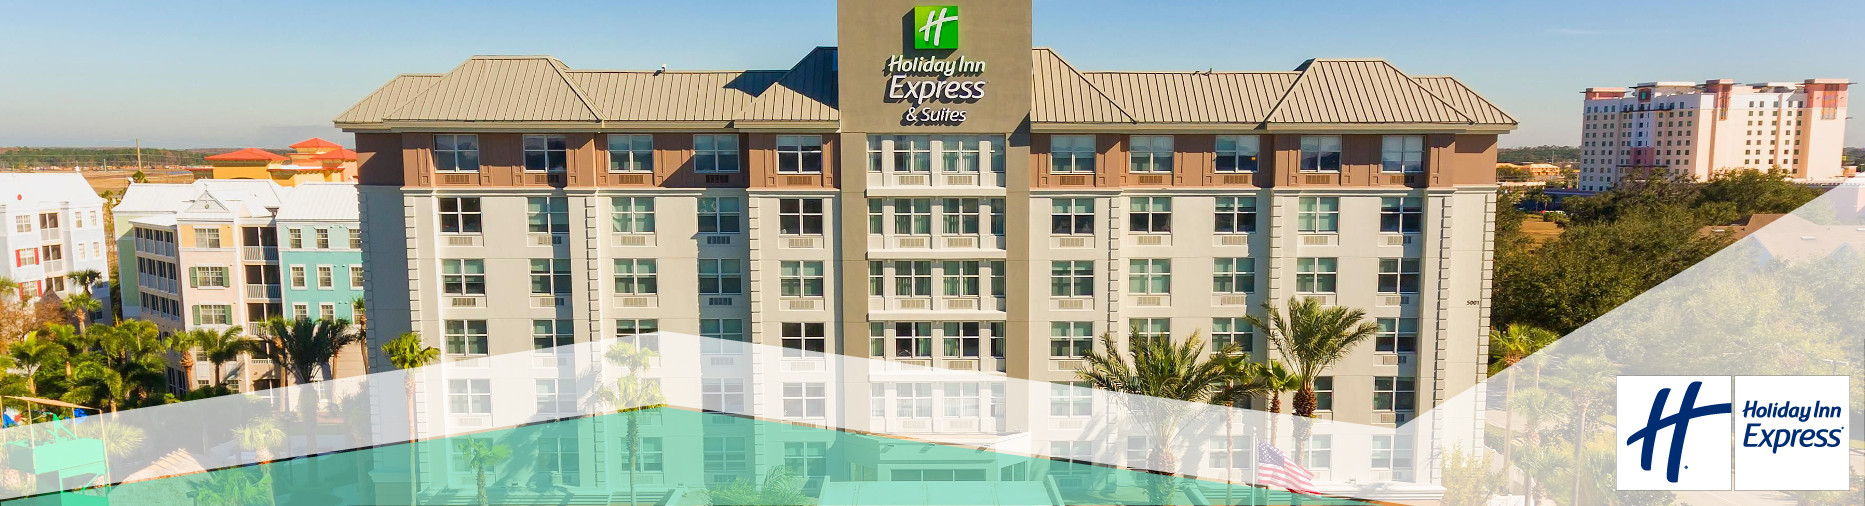 4 days / 3 nights, Stay at Holiday Inn Express & Suites in Florida